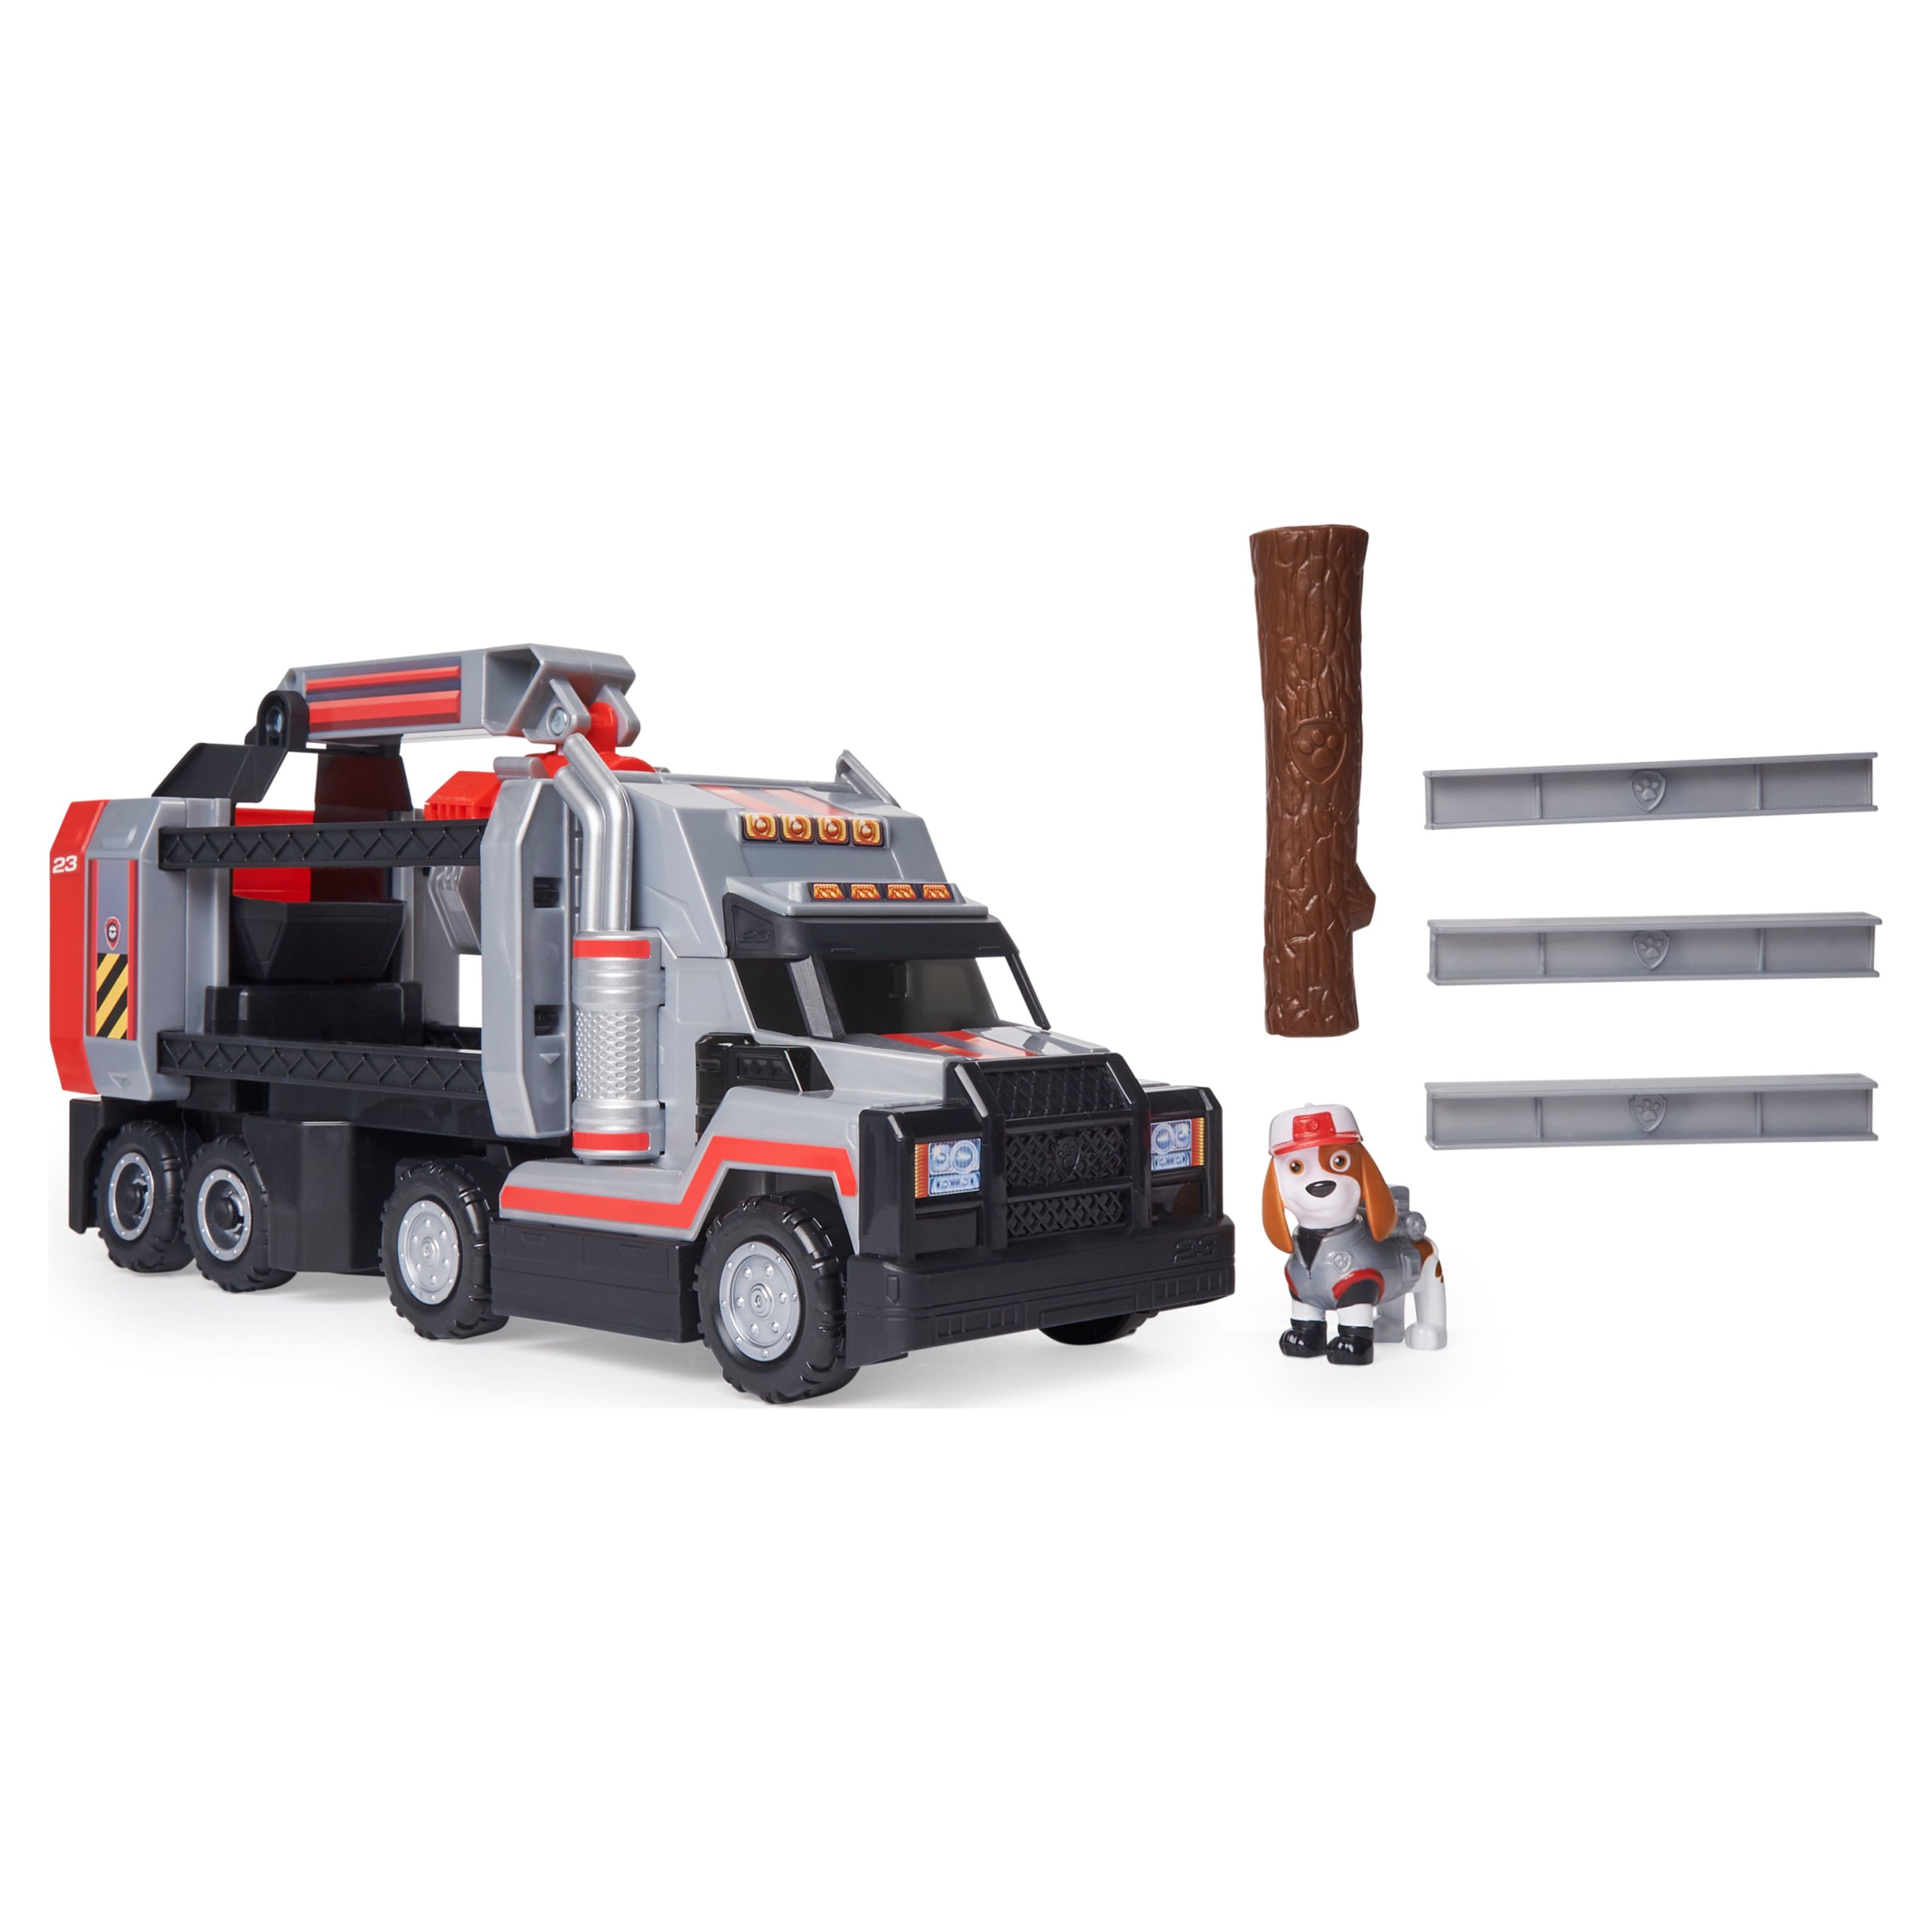 PAW Patrol, Al’s Deluxe Big Truck Toy with Moveable Claw Arm and Accessories - image 1 of 8